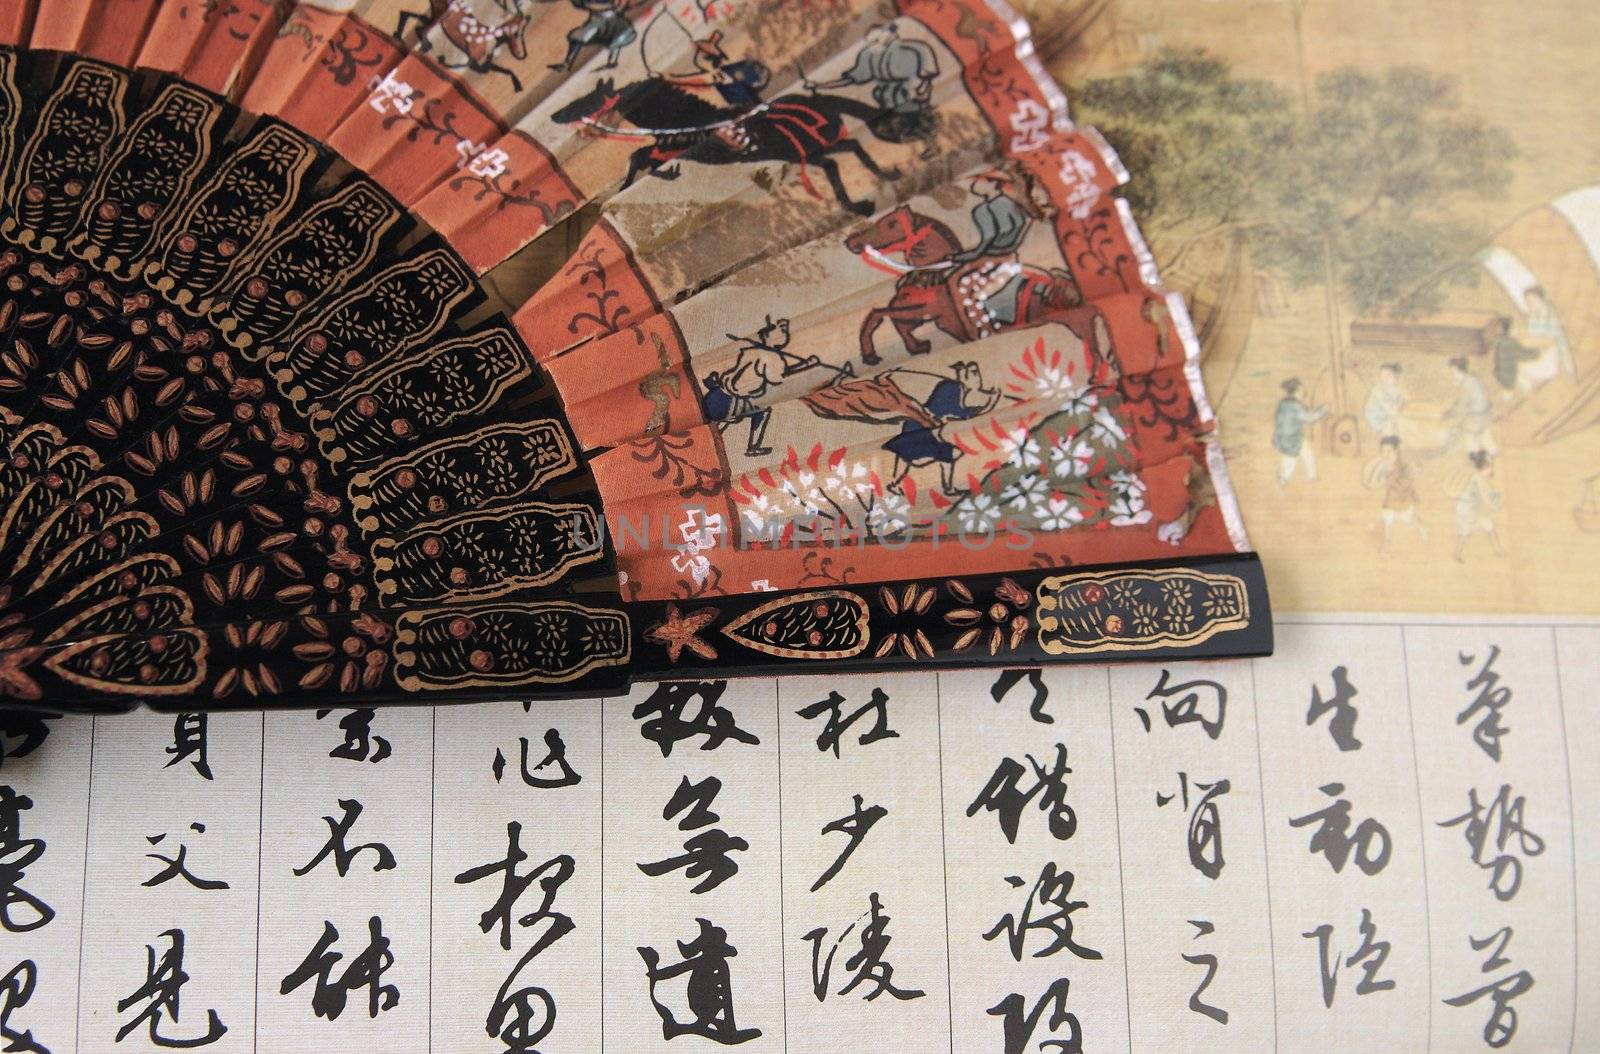 decorative but damaged old hand fan over an art paper background of Chinese calligraphy and figures